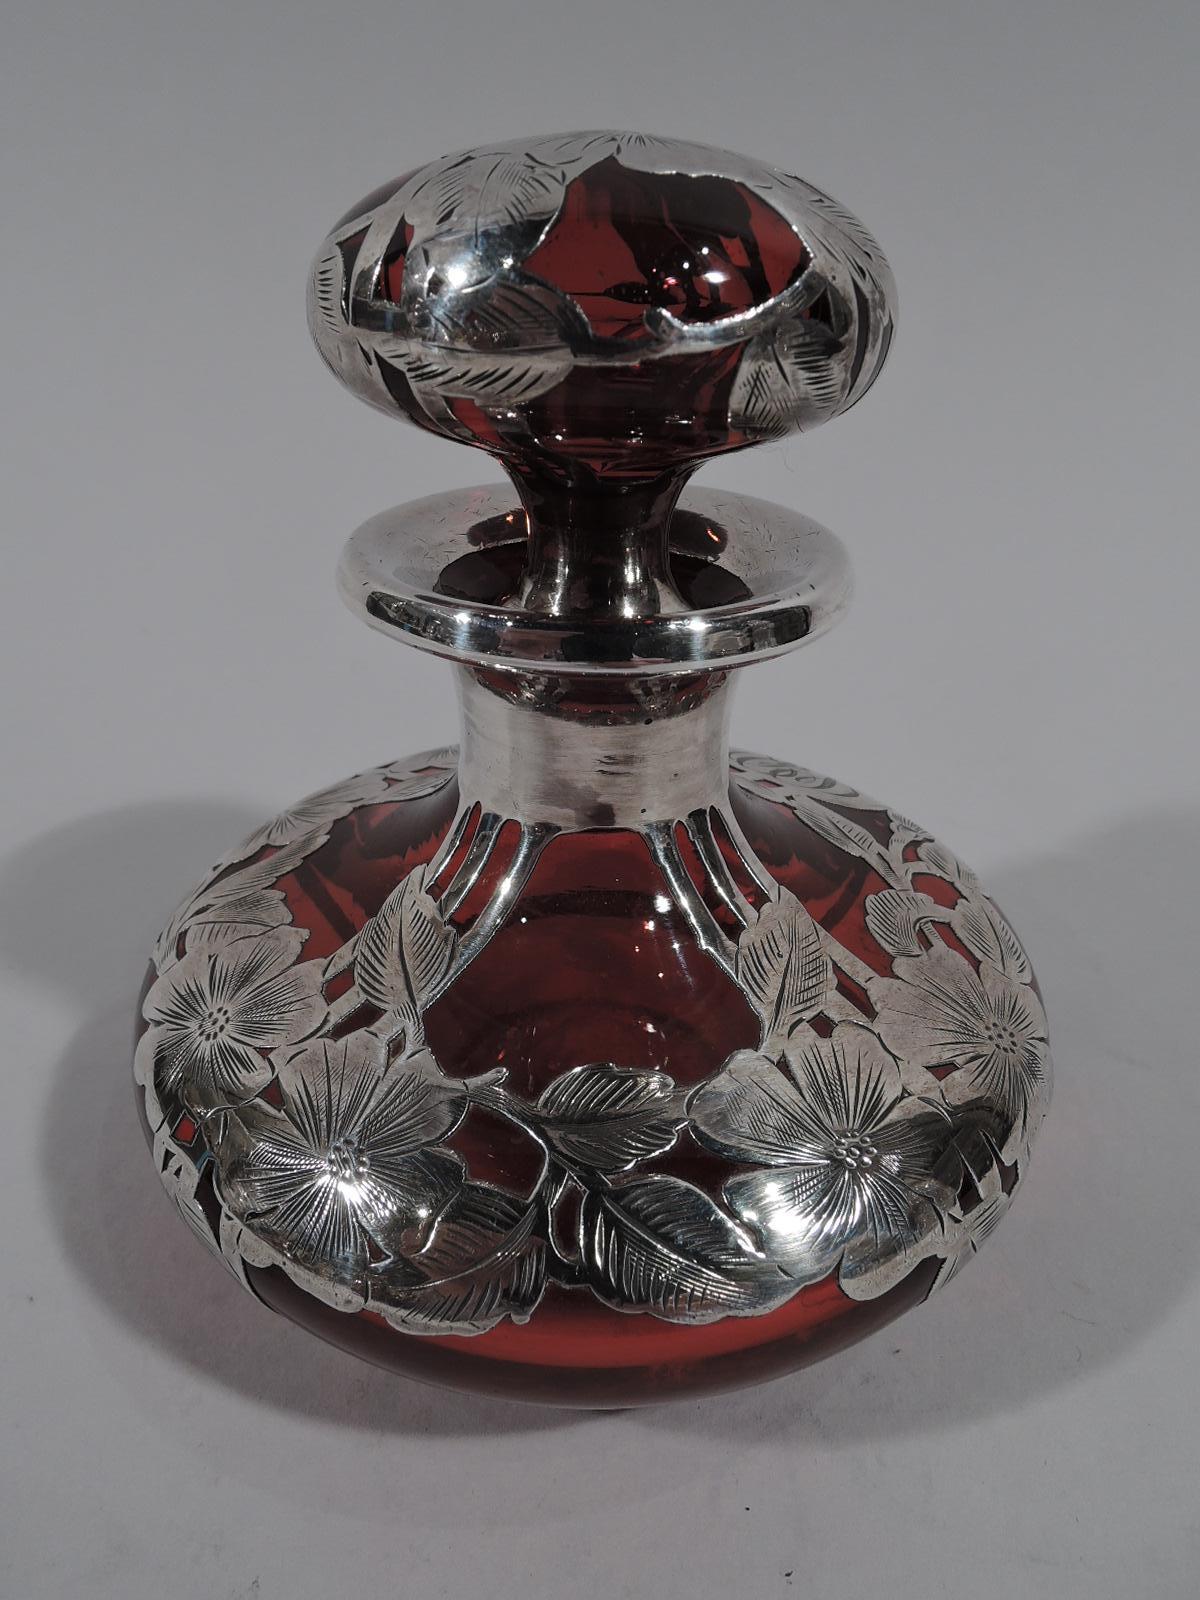 Gorgeous turn-of-the-century Art Nouveau red glass perfume with engraved silver overlay. Made by Alvin in Providence. Bellied bowl with short neck and flattened ball stopper. Overlay in form of garland over pilasters, and circular frame engraved